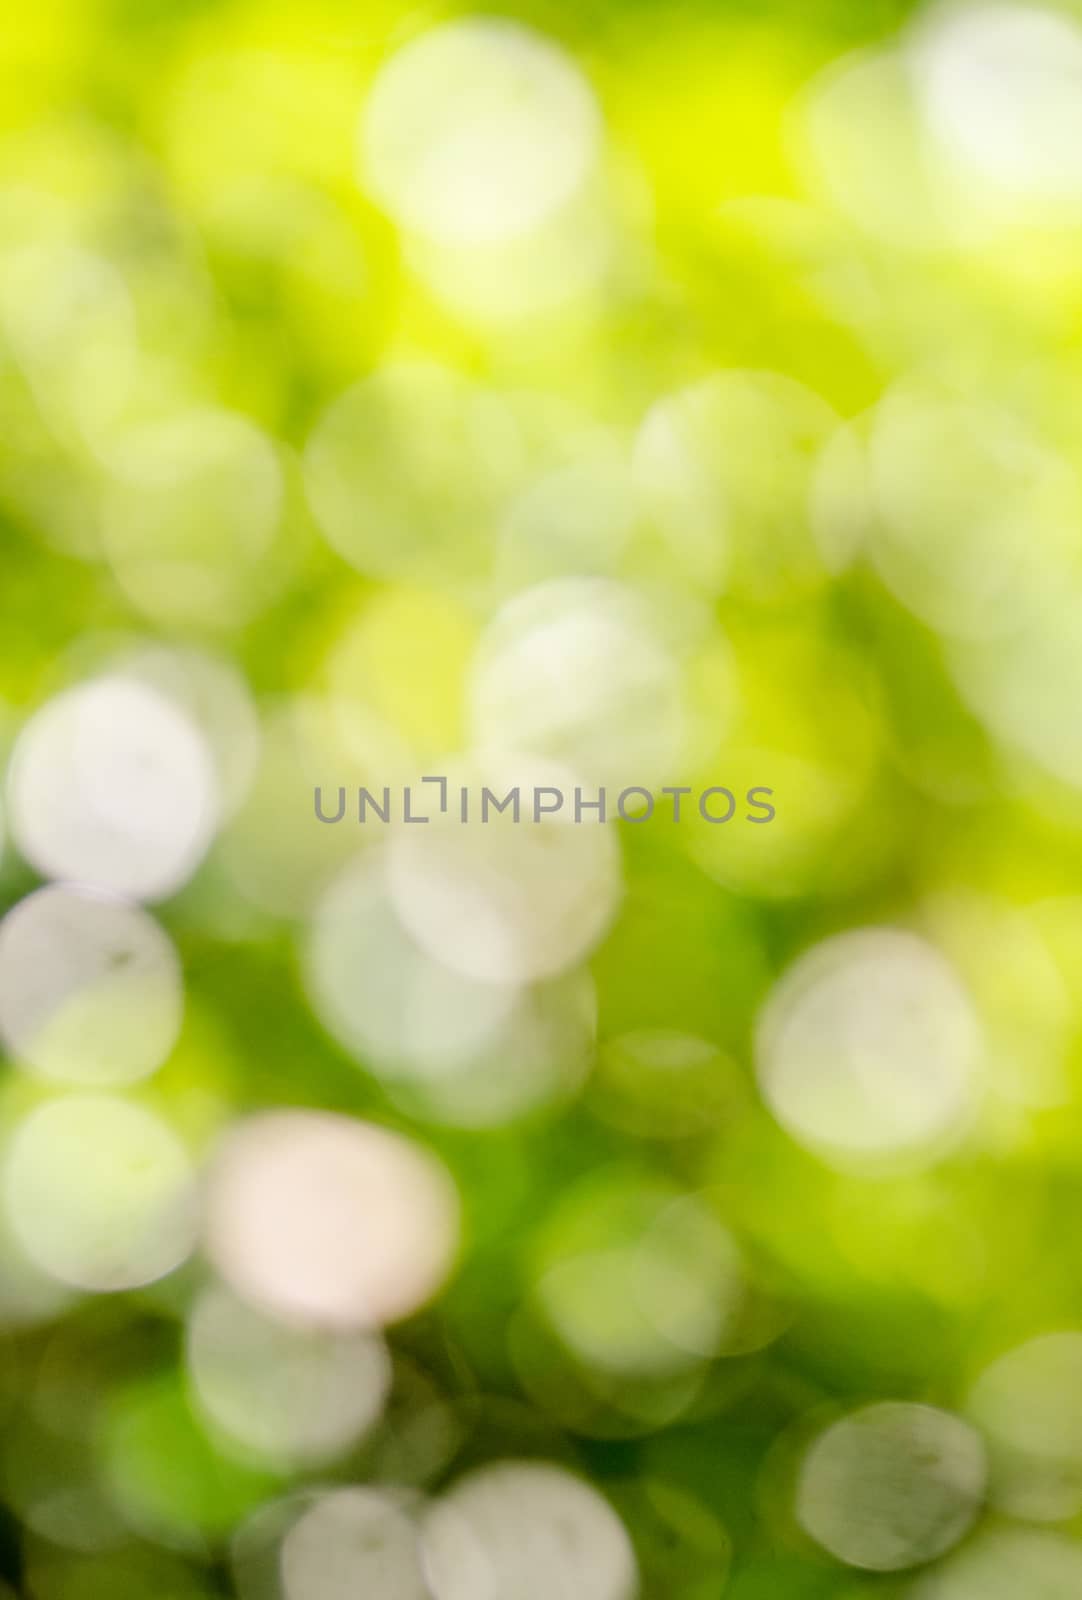 Abstract defocused background